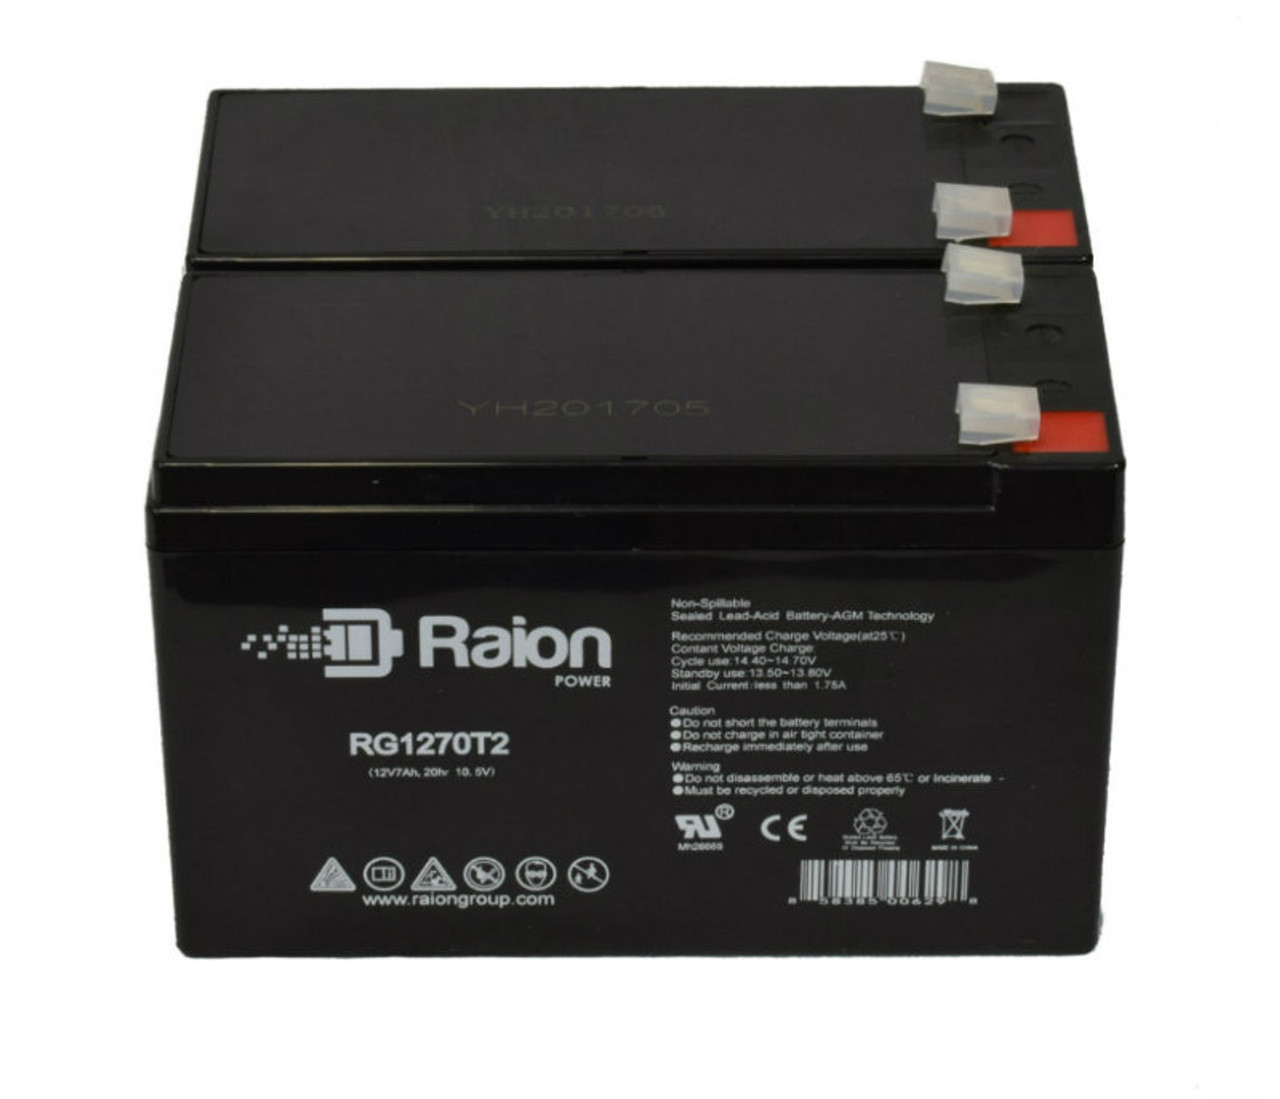 Raion Power Replacement 12V 7Ah Battery for GE Medical Systems LOGIQ 9 Ultrasound - 2 Pack